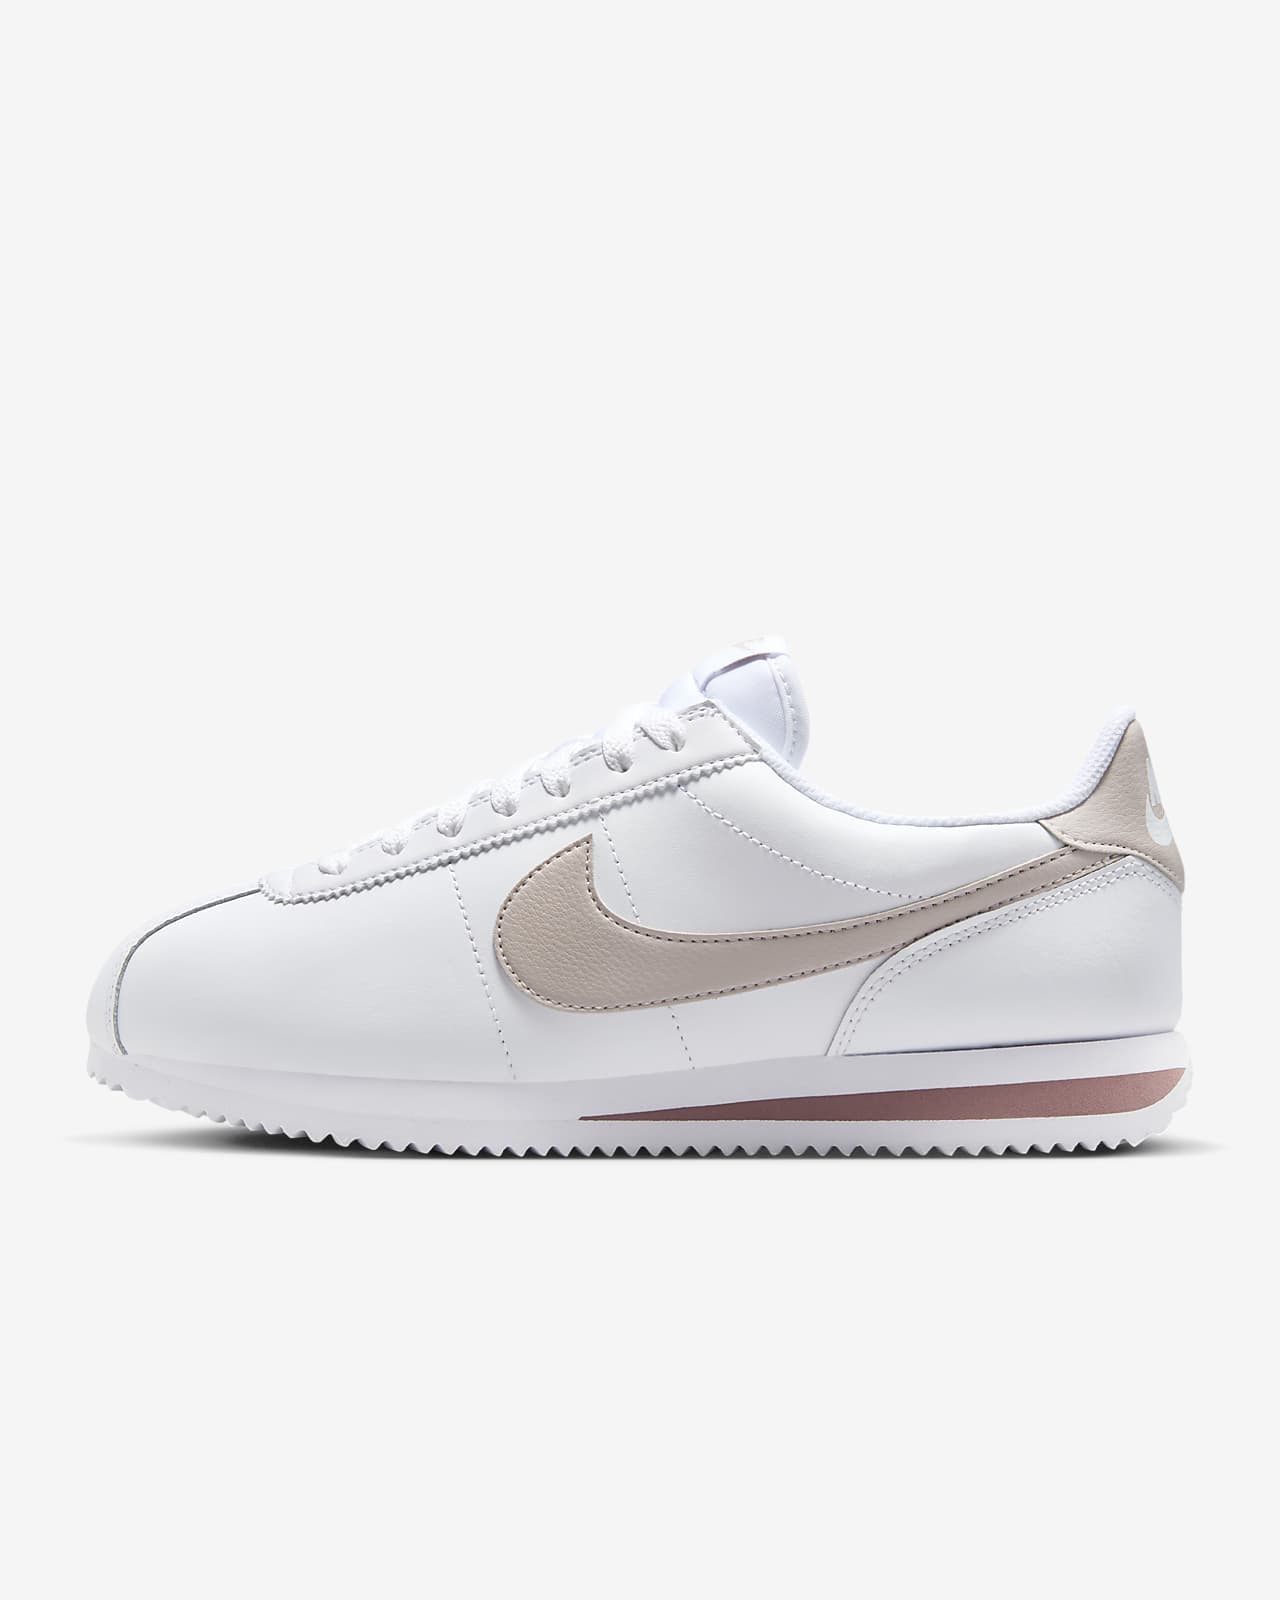 cortez - Brand Outfit